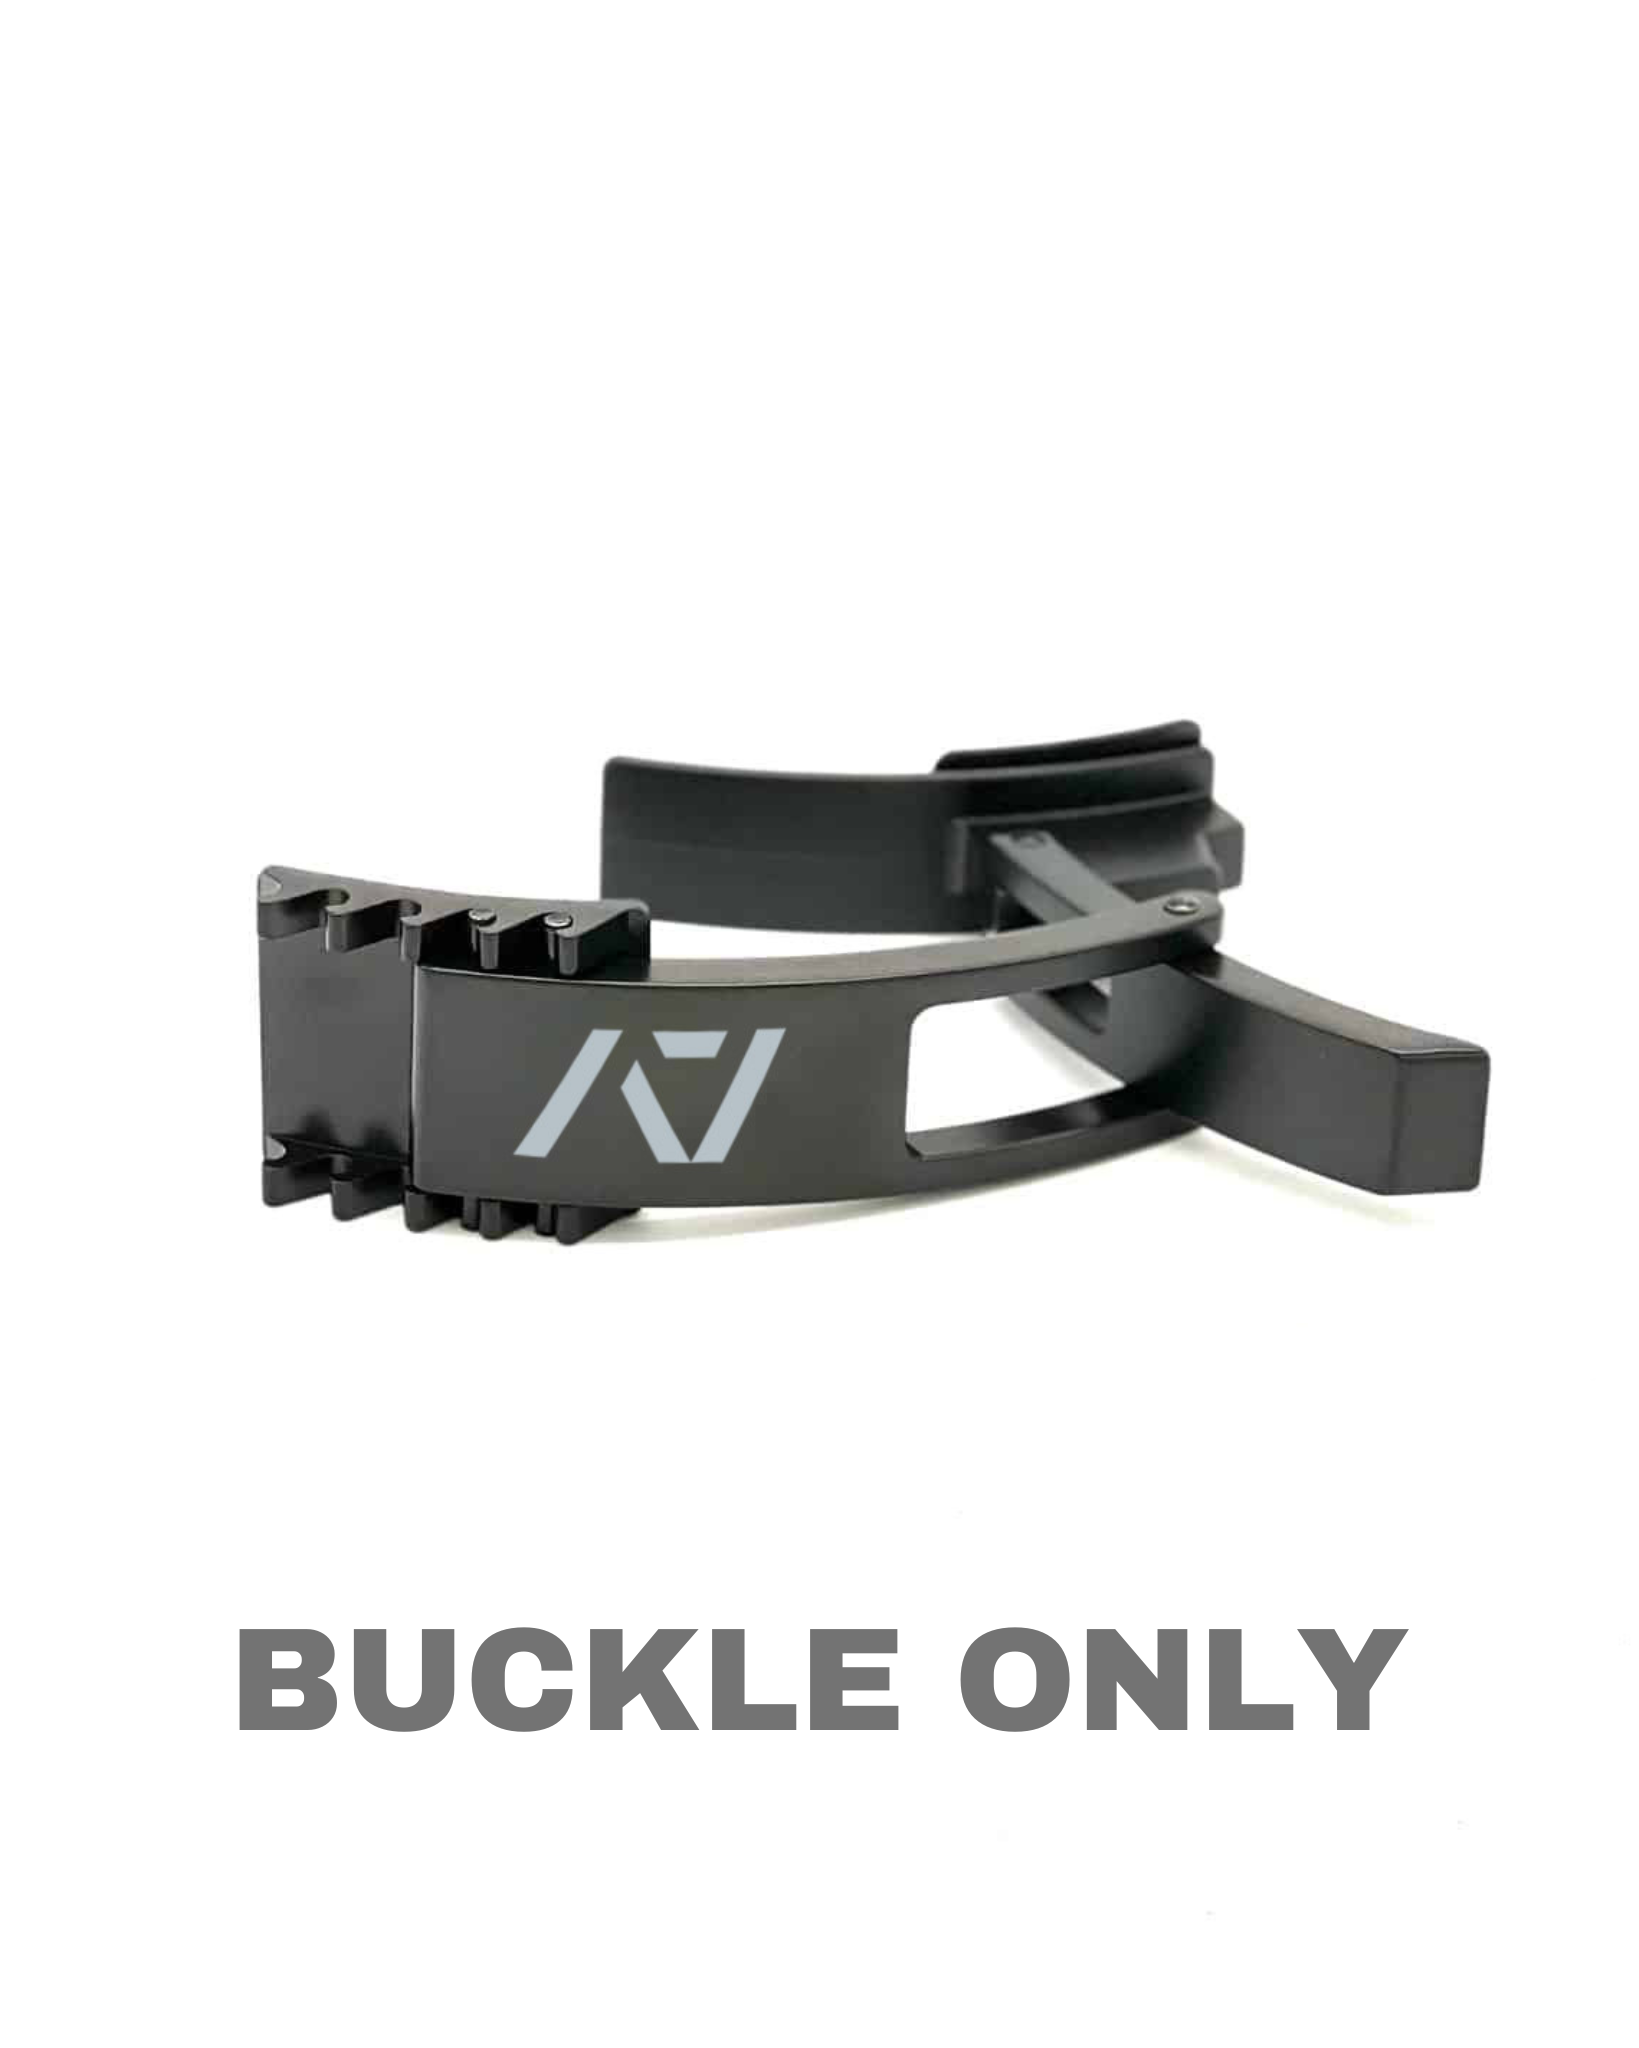 A7 PAL Buckle - IPF Approved - Black